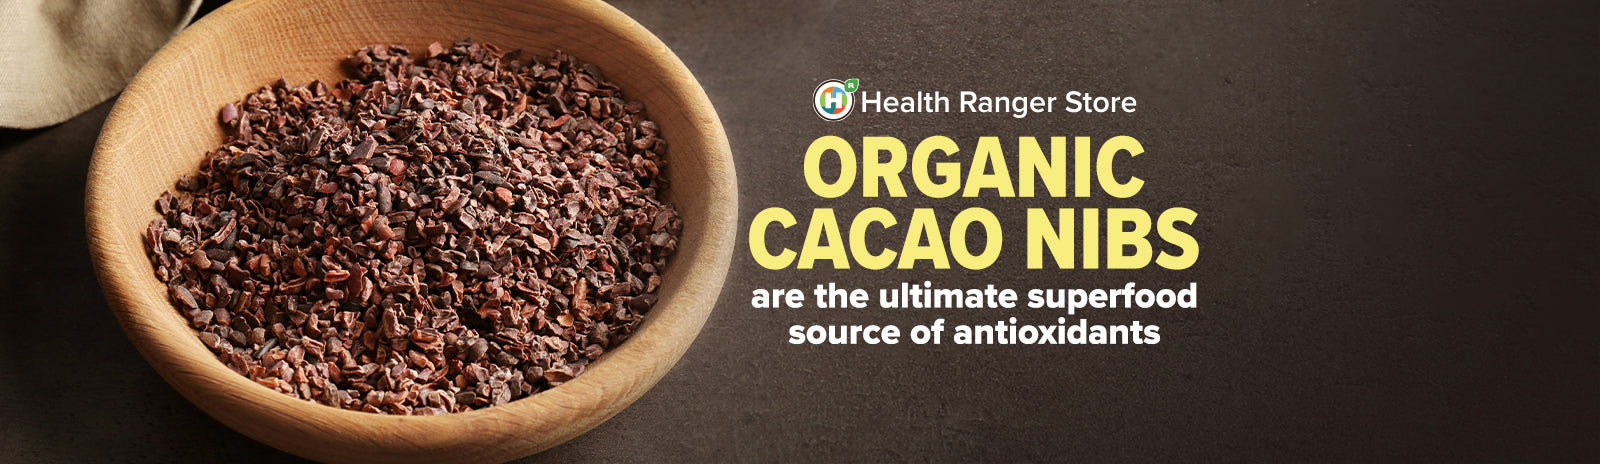 Organic cacao nibs are the ultimate superfood source of antioxidants